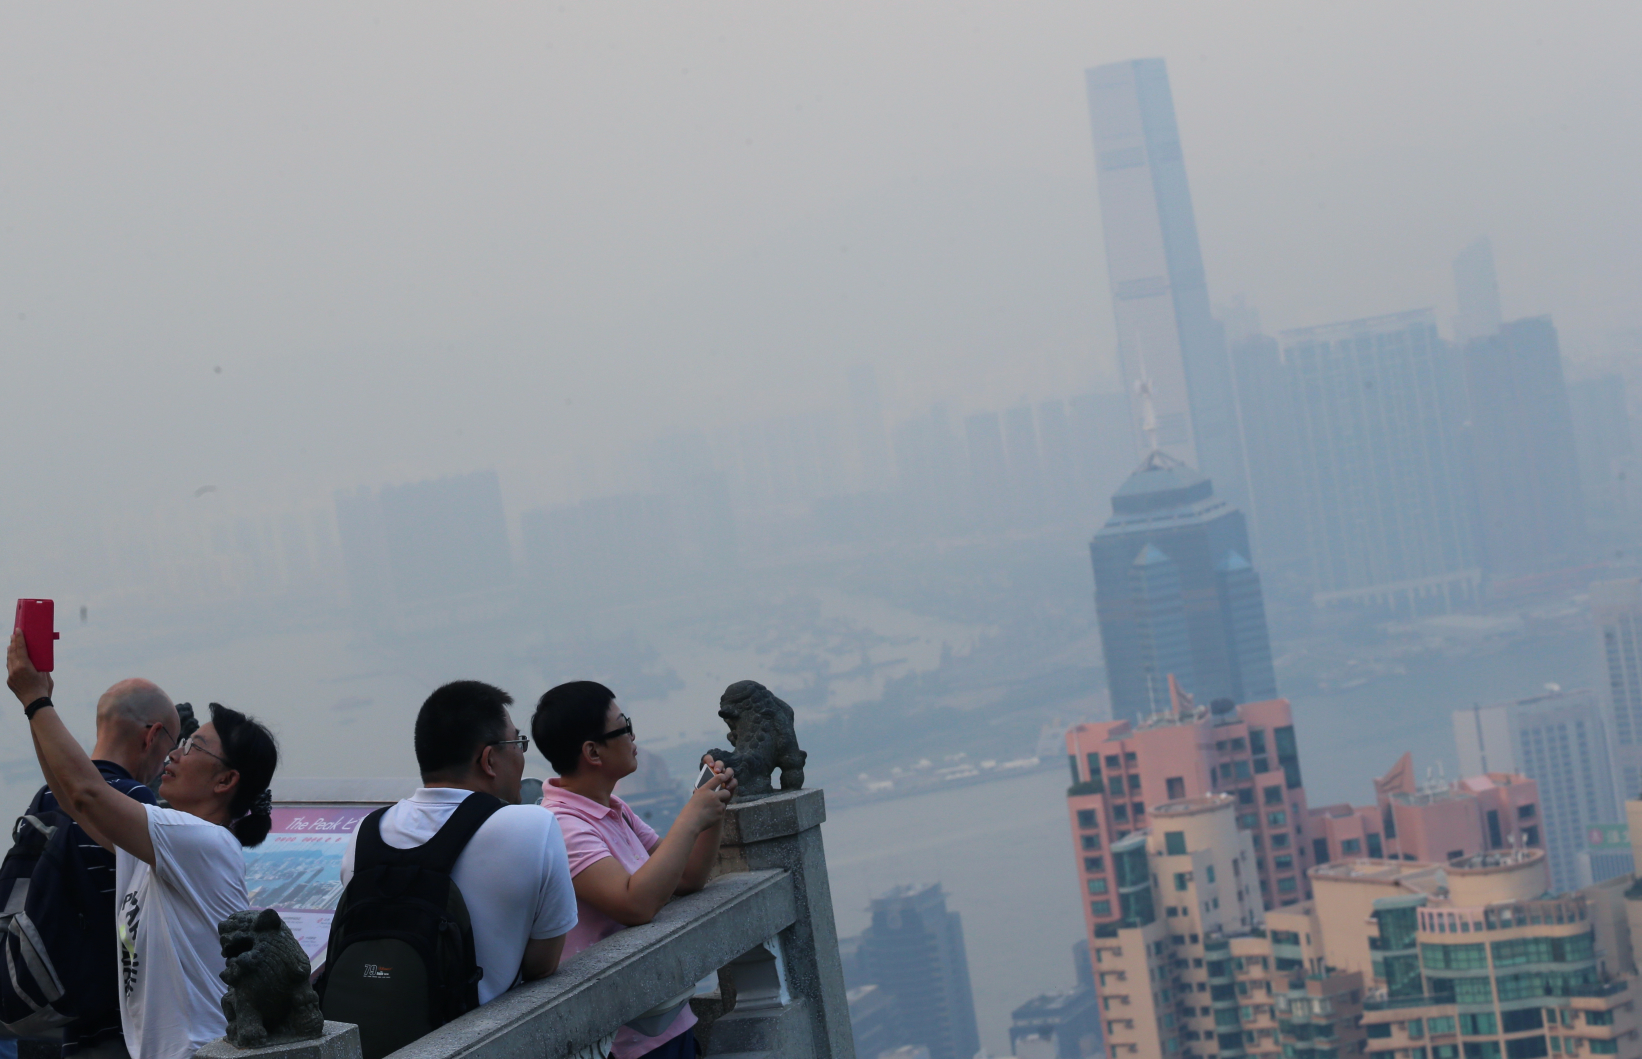 The air quality index now warns us of health risks. But what's next? Do we hide indoors during "serious" health risk days? Photo: David Wong